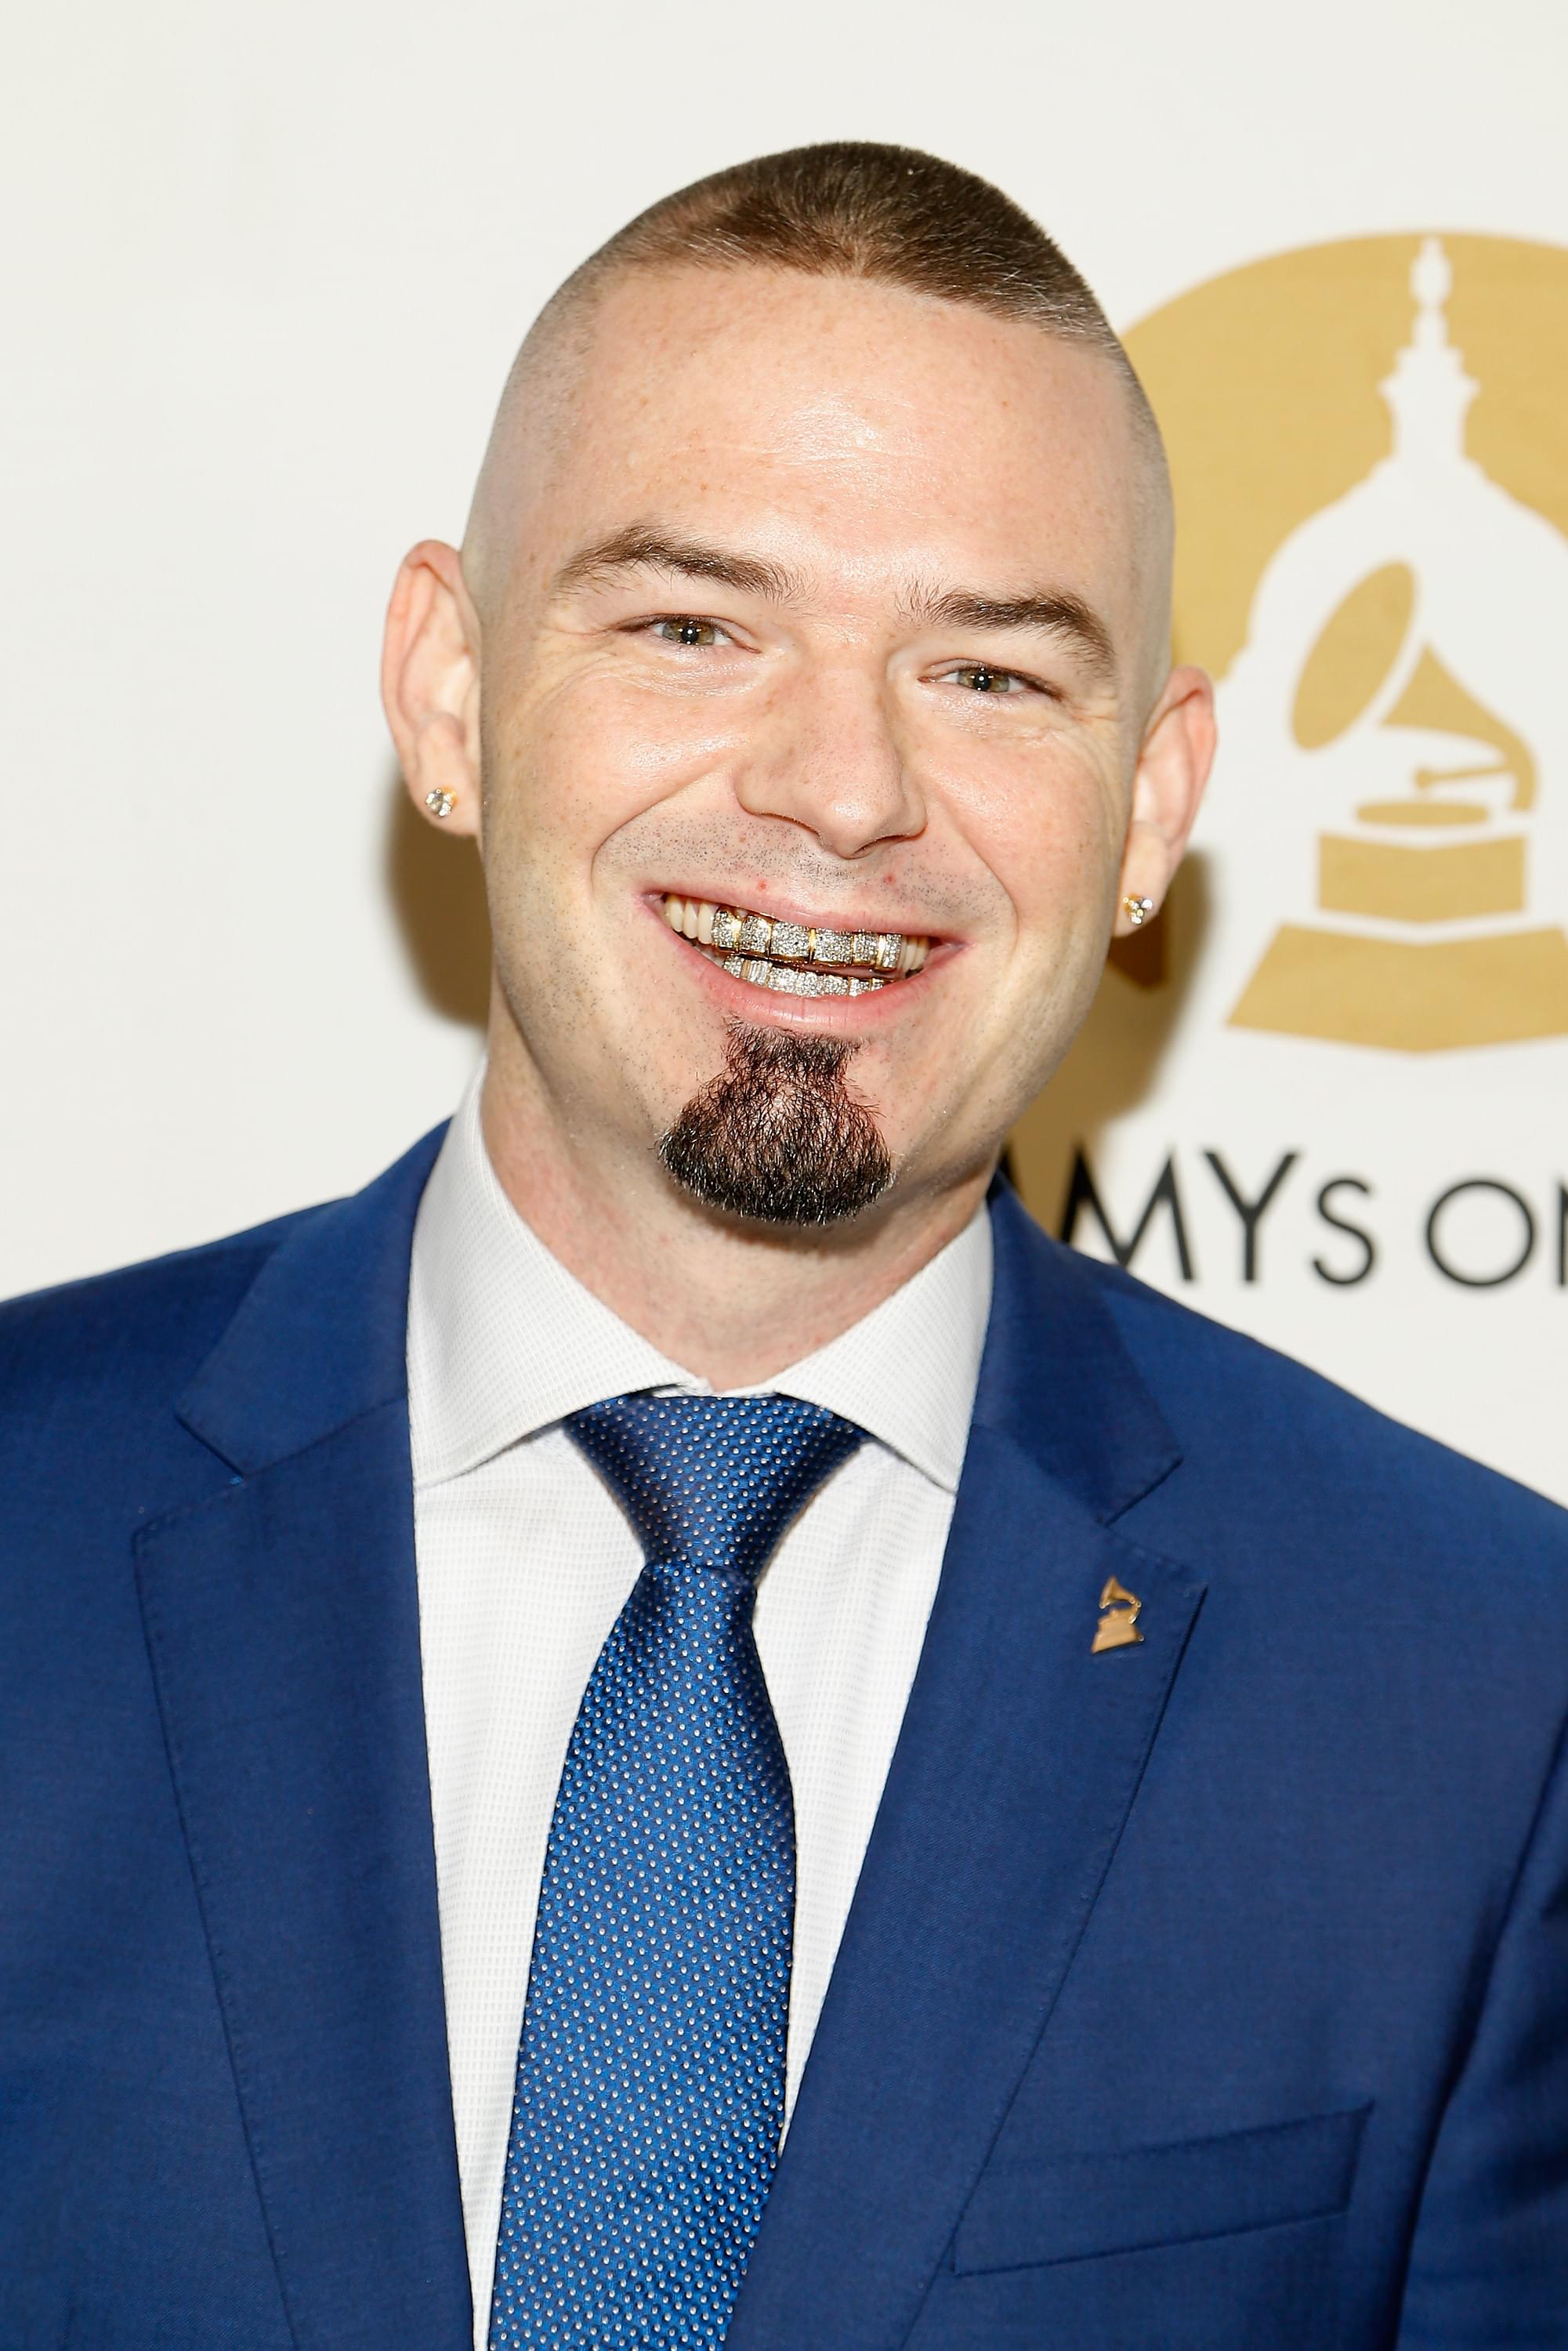 Paul Wall & Baby Bash Inform People On How To Help Hurricane Harvey Victims [WATCH]